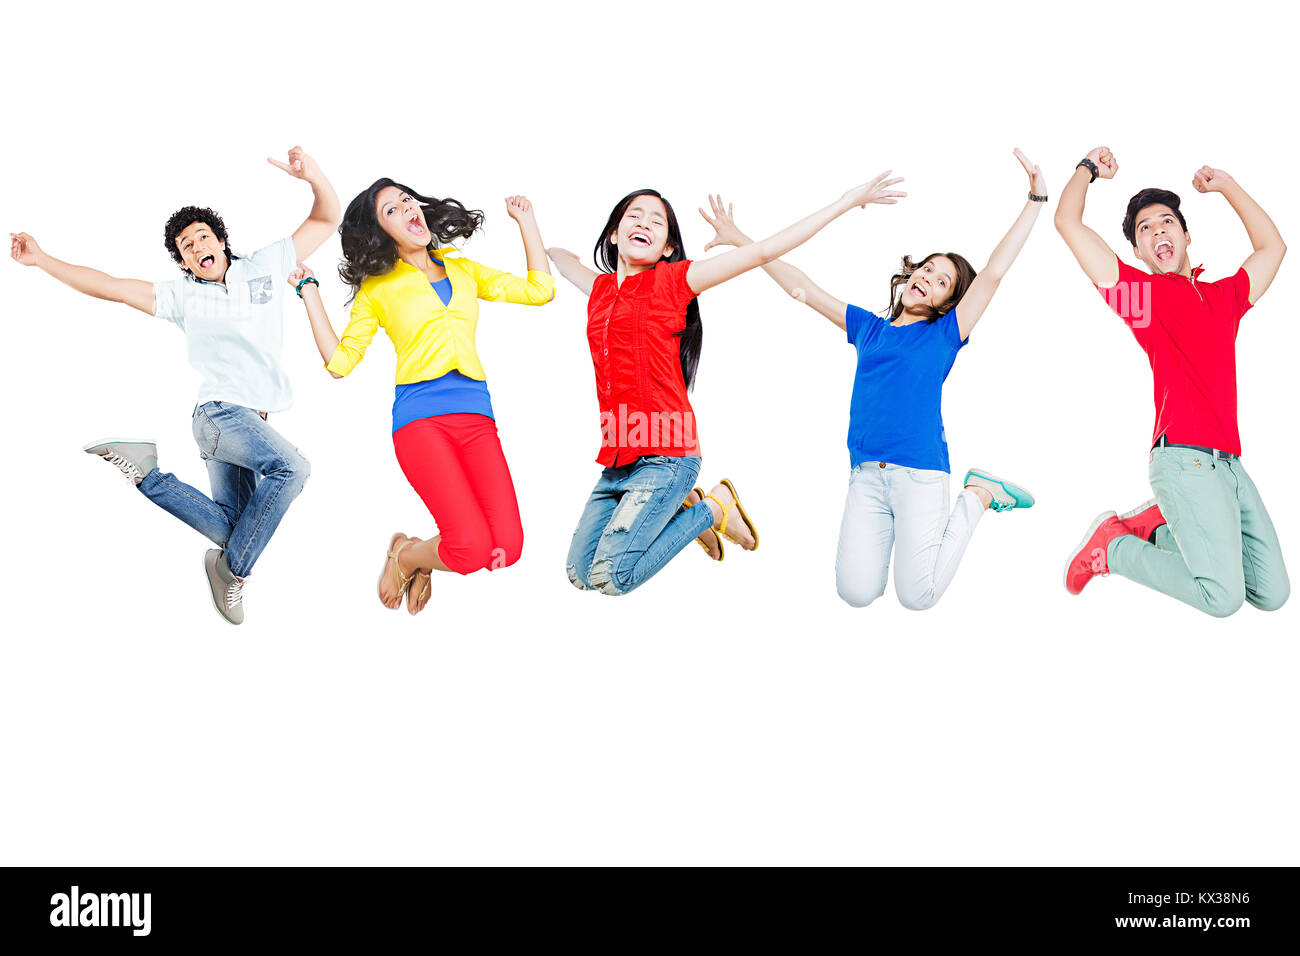 Shouted Indian Young Boys And Girls Friends Jumping Fun Cheerful Stock Photo